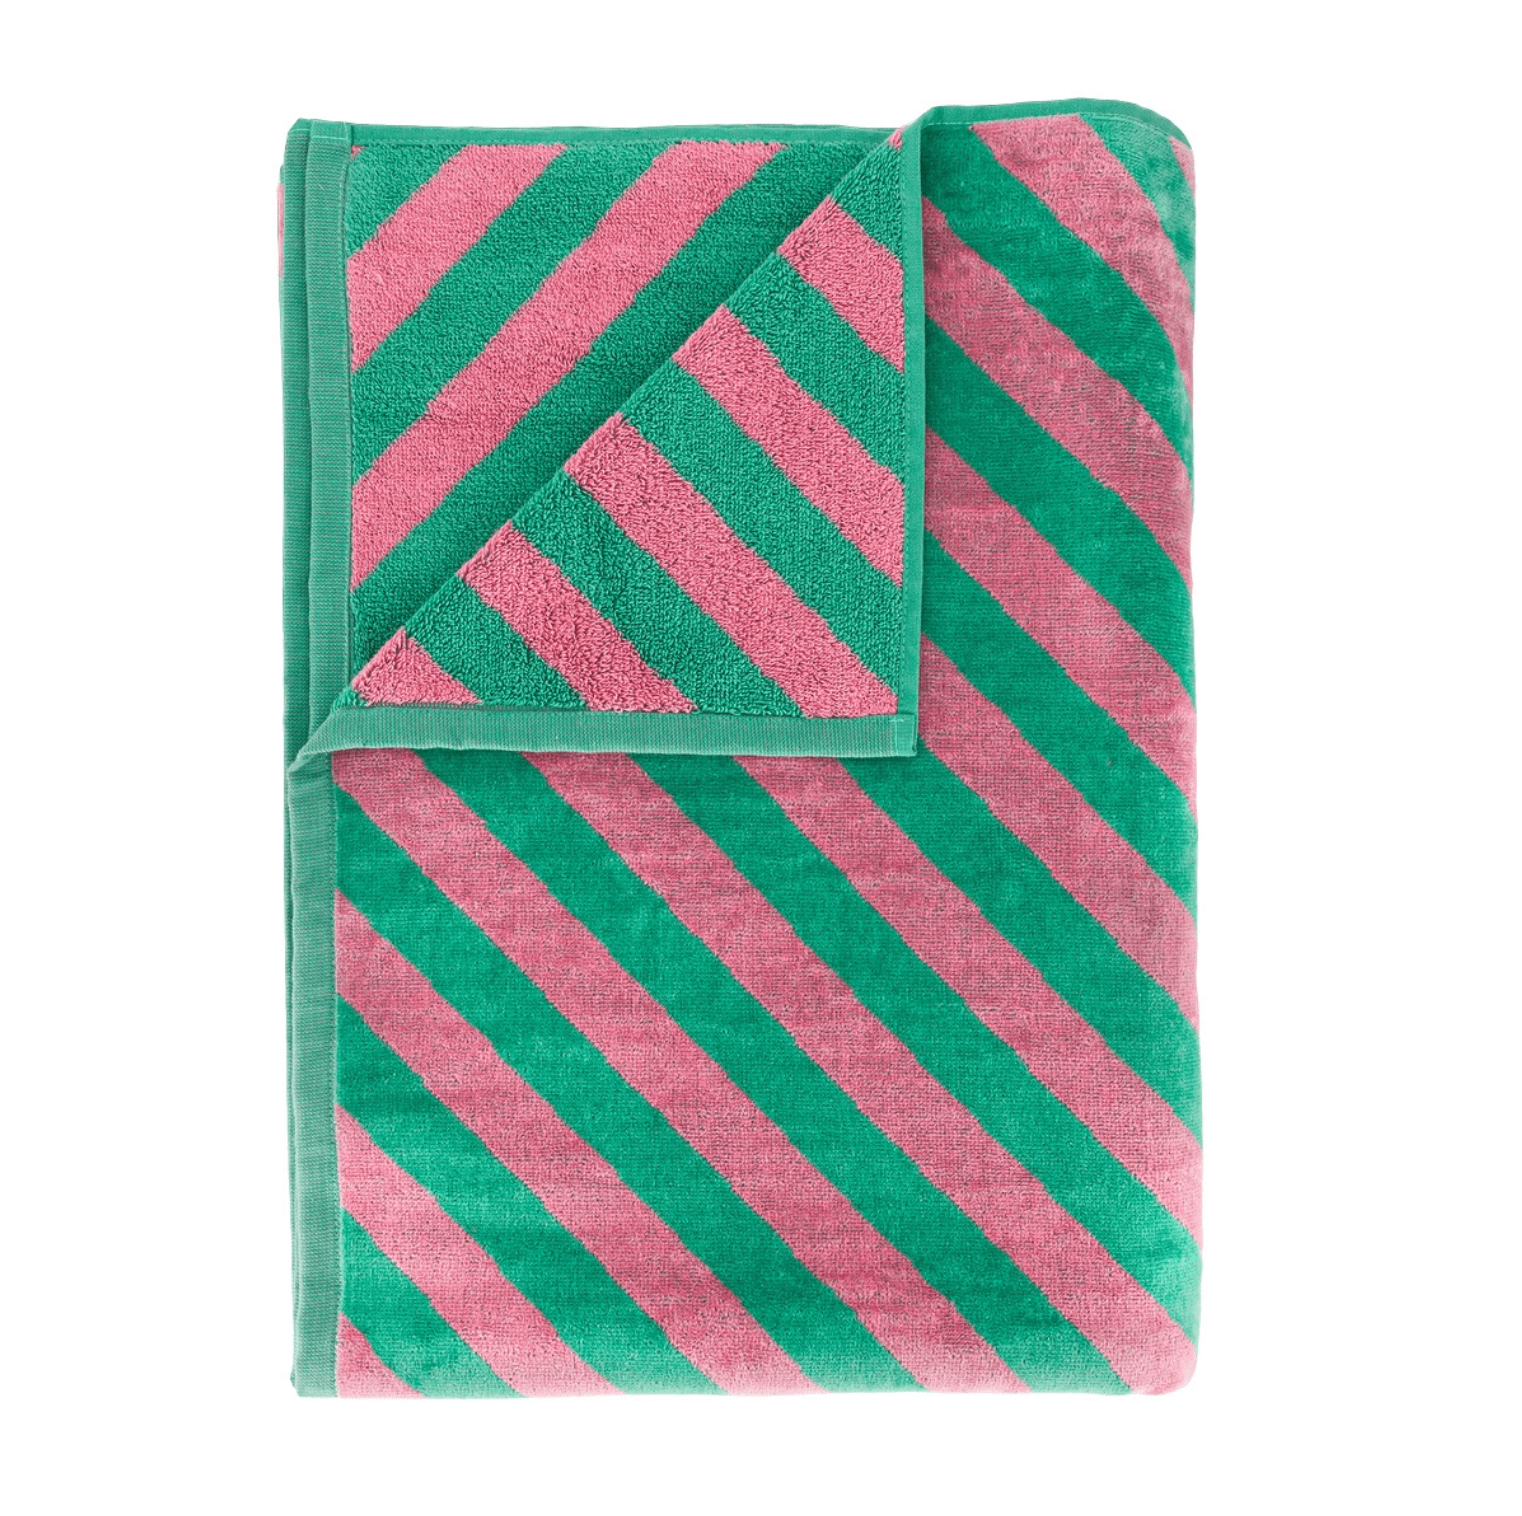 The Socialite family green and pink beach towel.